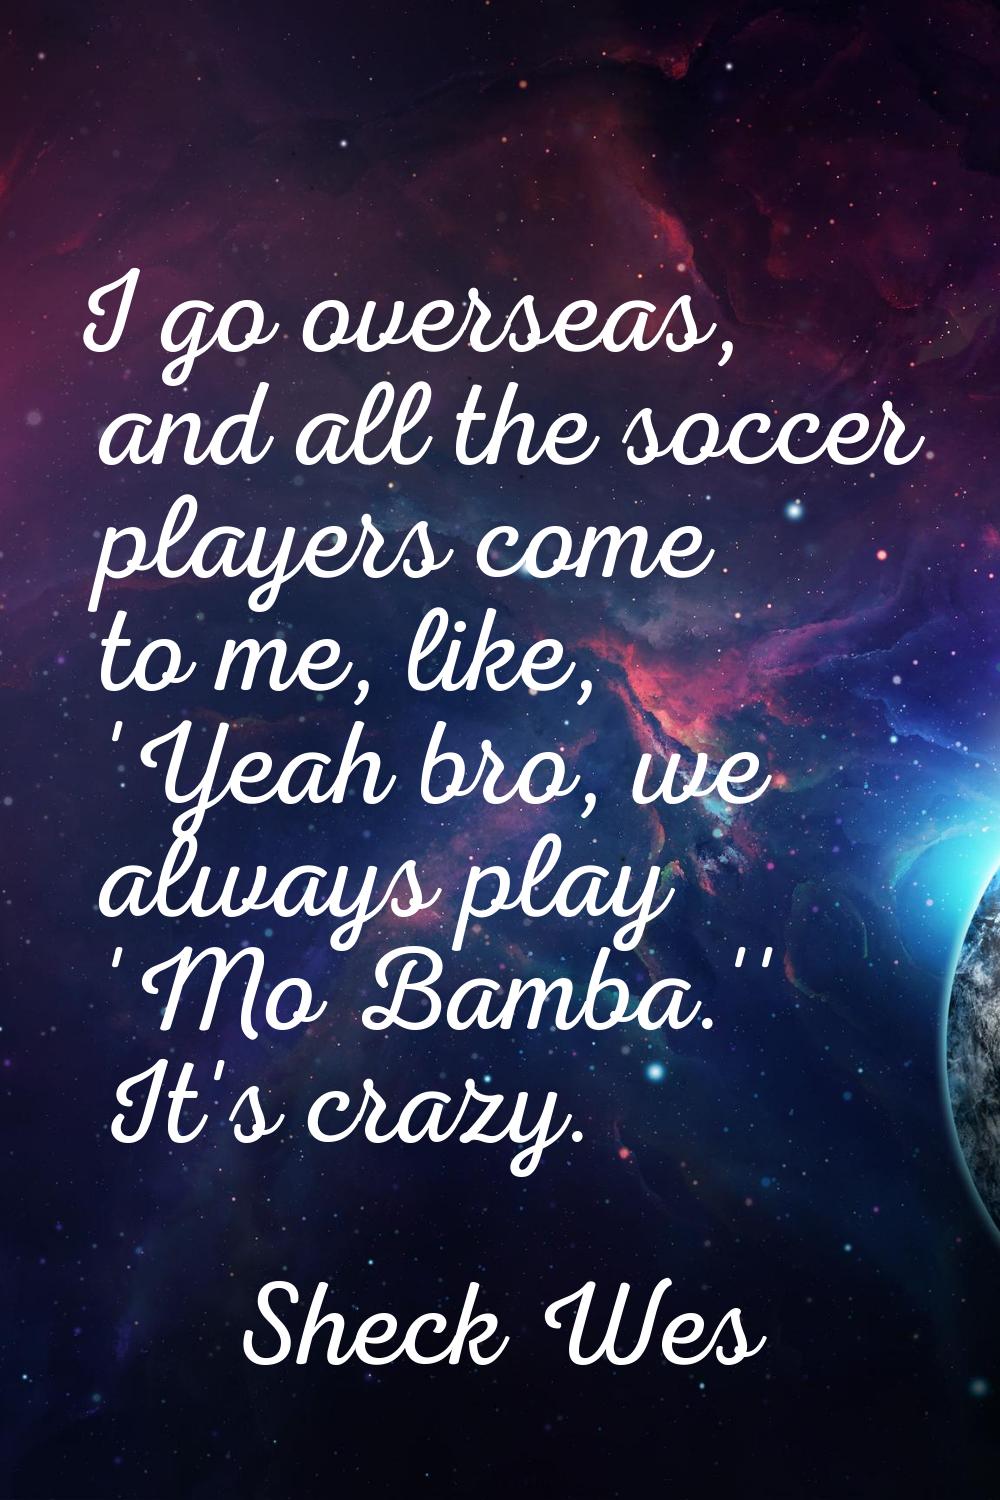 I go overseas, and all the soccer players come to me, like, 'Yeah bro, we always play 'Mo Bamba.'' 